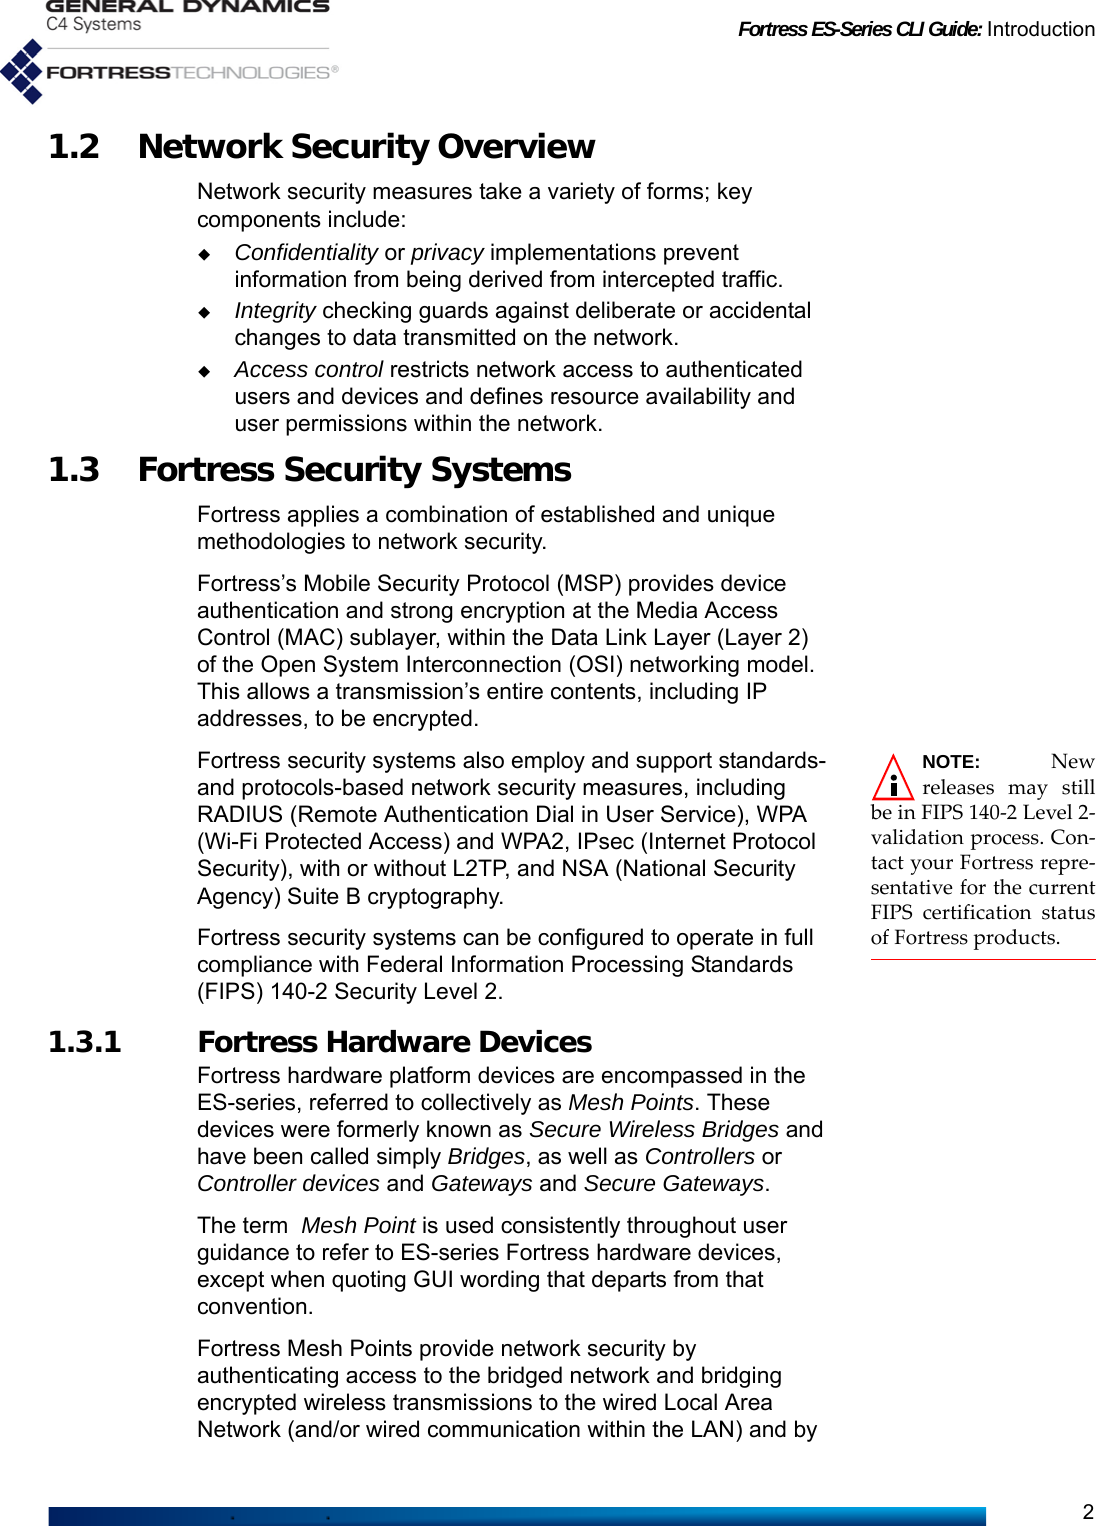 Fortress ES-Series CLI Guide: Introduction21.2 Network Security OverviewNetwork security measures take a variety of forms; key components include:Confidentiality or privacy implementations prevent information from being derived from intercepted traffic.Integrity checking guards against deliberate or accidental changes to data transmitted on the network.Access control restricts network access to authenticated users and devices and defines resource availability and user permissions within the network.1.3 Fortress Security SystemsFortress applies a combination of established and unique methodologies to network security. Fortress’s Mobile Security Protocol (MSP) provides device authentication and strong encryption at the Media Access Control (MAC) sublayer, within the Data Link Layer (Layer 2) of the Open System Interconnection (OSI) networking model. This allows a transmission’s entire contents, including IP addresses, to be encrypted.NOTE: Newreleases may stillbe in FIPS 140-2 Level 2-validation process. Con-tact your Fortress repre-sentative for the currentFIPS certification statusof Fortress products.Fortress security systems also employ and support standards- and protocols-based network security measures, including RADIUS (Remote Authentication Dial in User Service), WPA (Wi-Fi Protected Access) and WPA2, IPsec (Internet Protocol Security), with or without L2TP, and NSA (National Security Agency) Suite B cryptography.Fortress security systems can be configured to operate in full compliance with Federal Information Processing Standards (FIPS) 140-2 Security Level 2.1.3.1 Fortress Hardware DevicesFortress hardware platform devices are encompassed in the ES-series, referred to collectively as Mesh Points. These devices were formerly known as Secure Wireless Bridges and have been called simply Bridges, as well as Controllers or Controller devices and Gateways and Secure Gateways. The term  Mesh Point is used consistently throughout user guidance to refer to ES-series Fortress hardware devices, except when quoting GUI wording that departs from that convention.Fortress Mesh Points provide network security by authenticating access to the bridged network and bridging encrypted wireless transmissions to the wired Local Area Network (and/or wired communication within the LAN) and by 